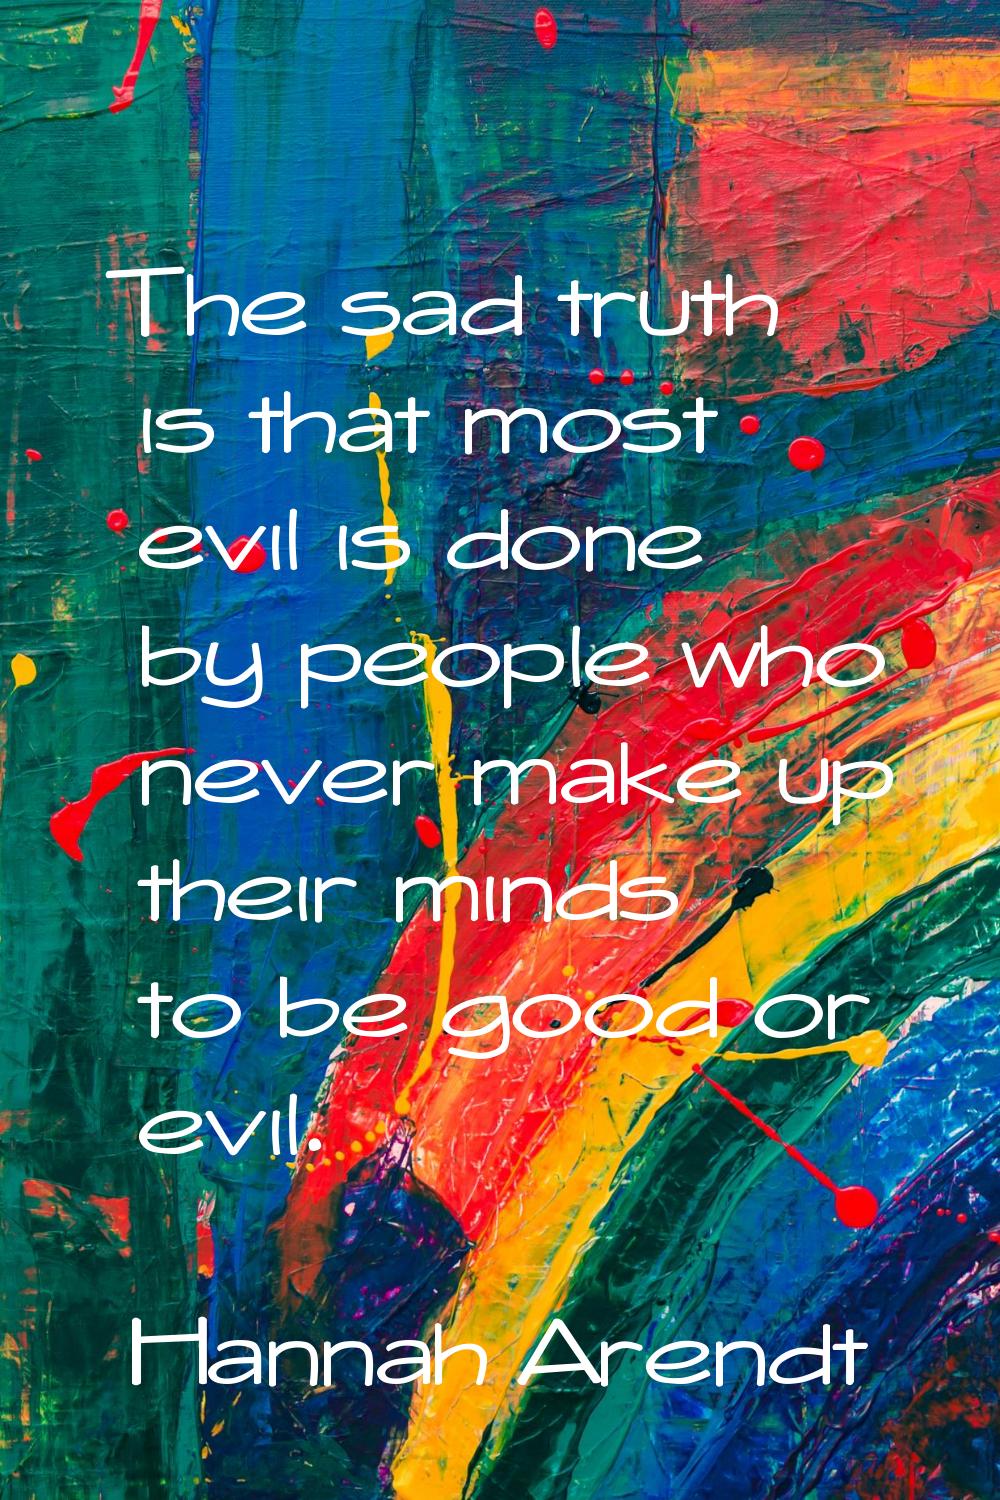 The sad truth is that most evil is done by people who never make up their minds to be good or evil.